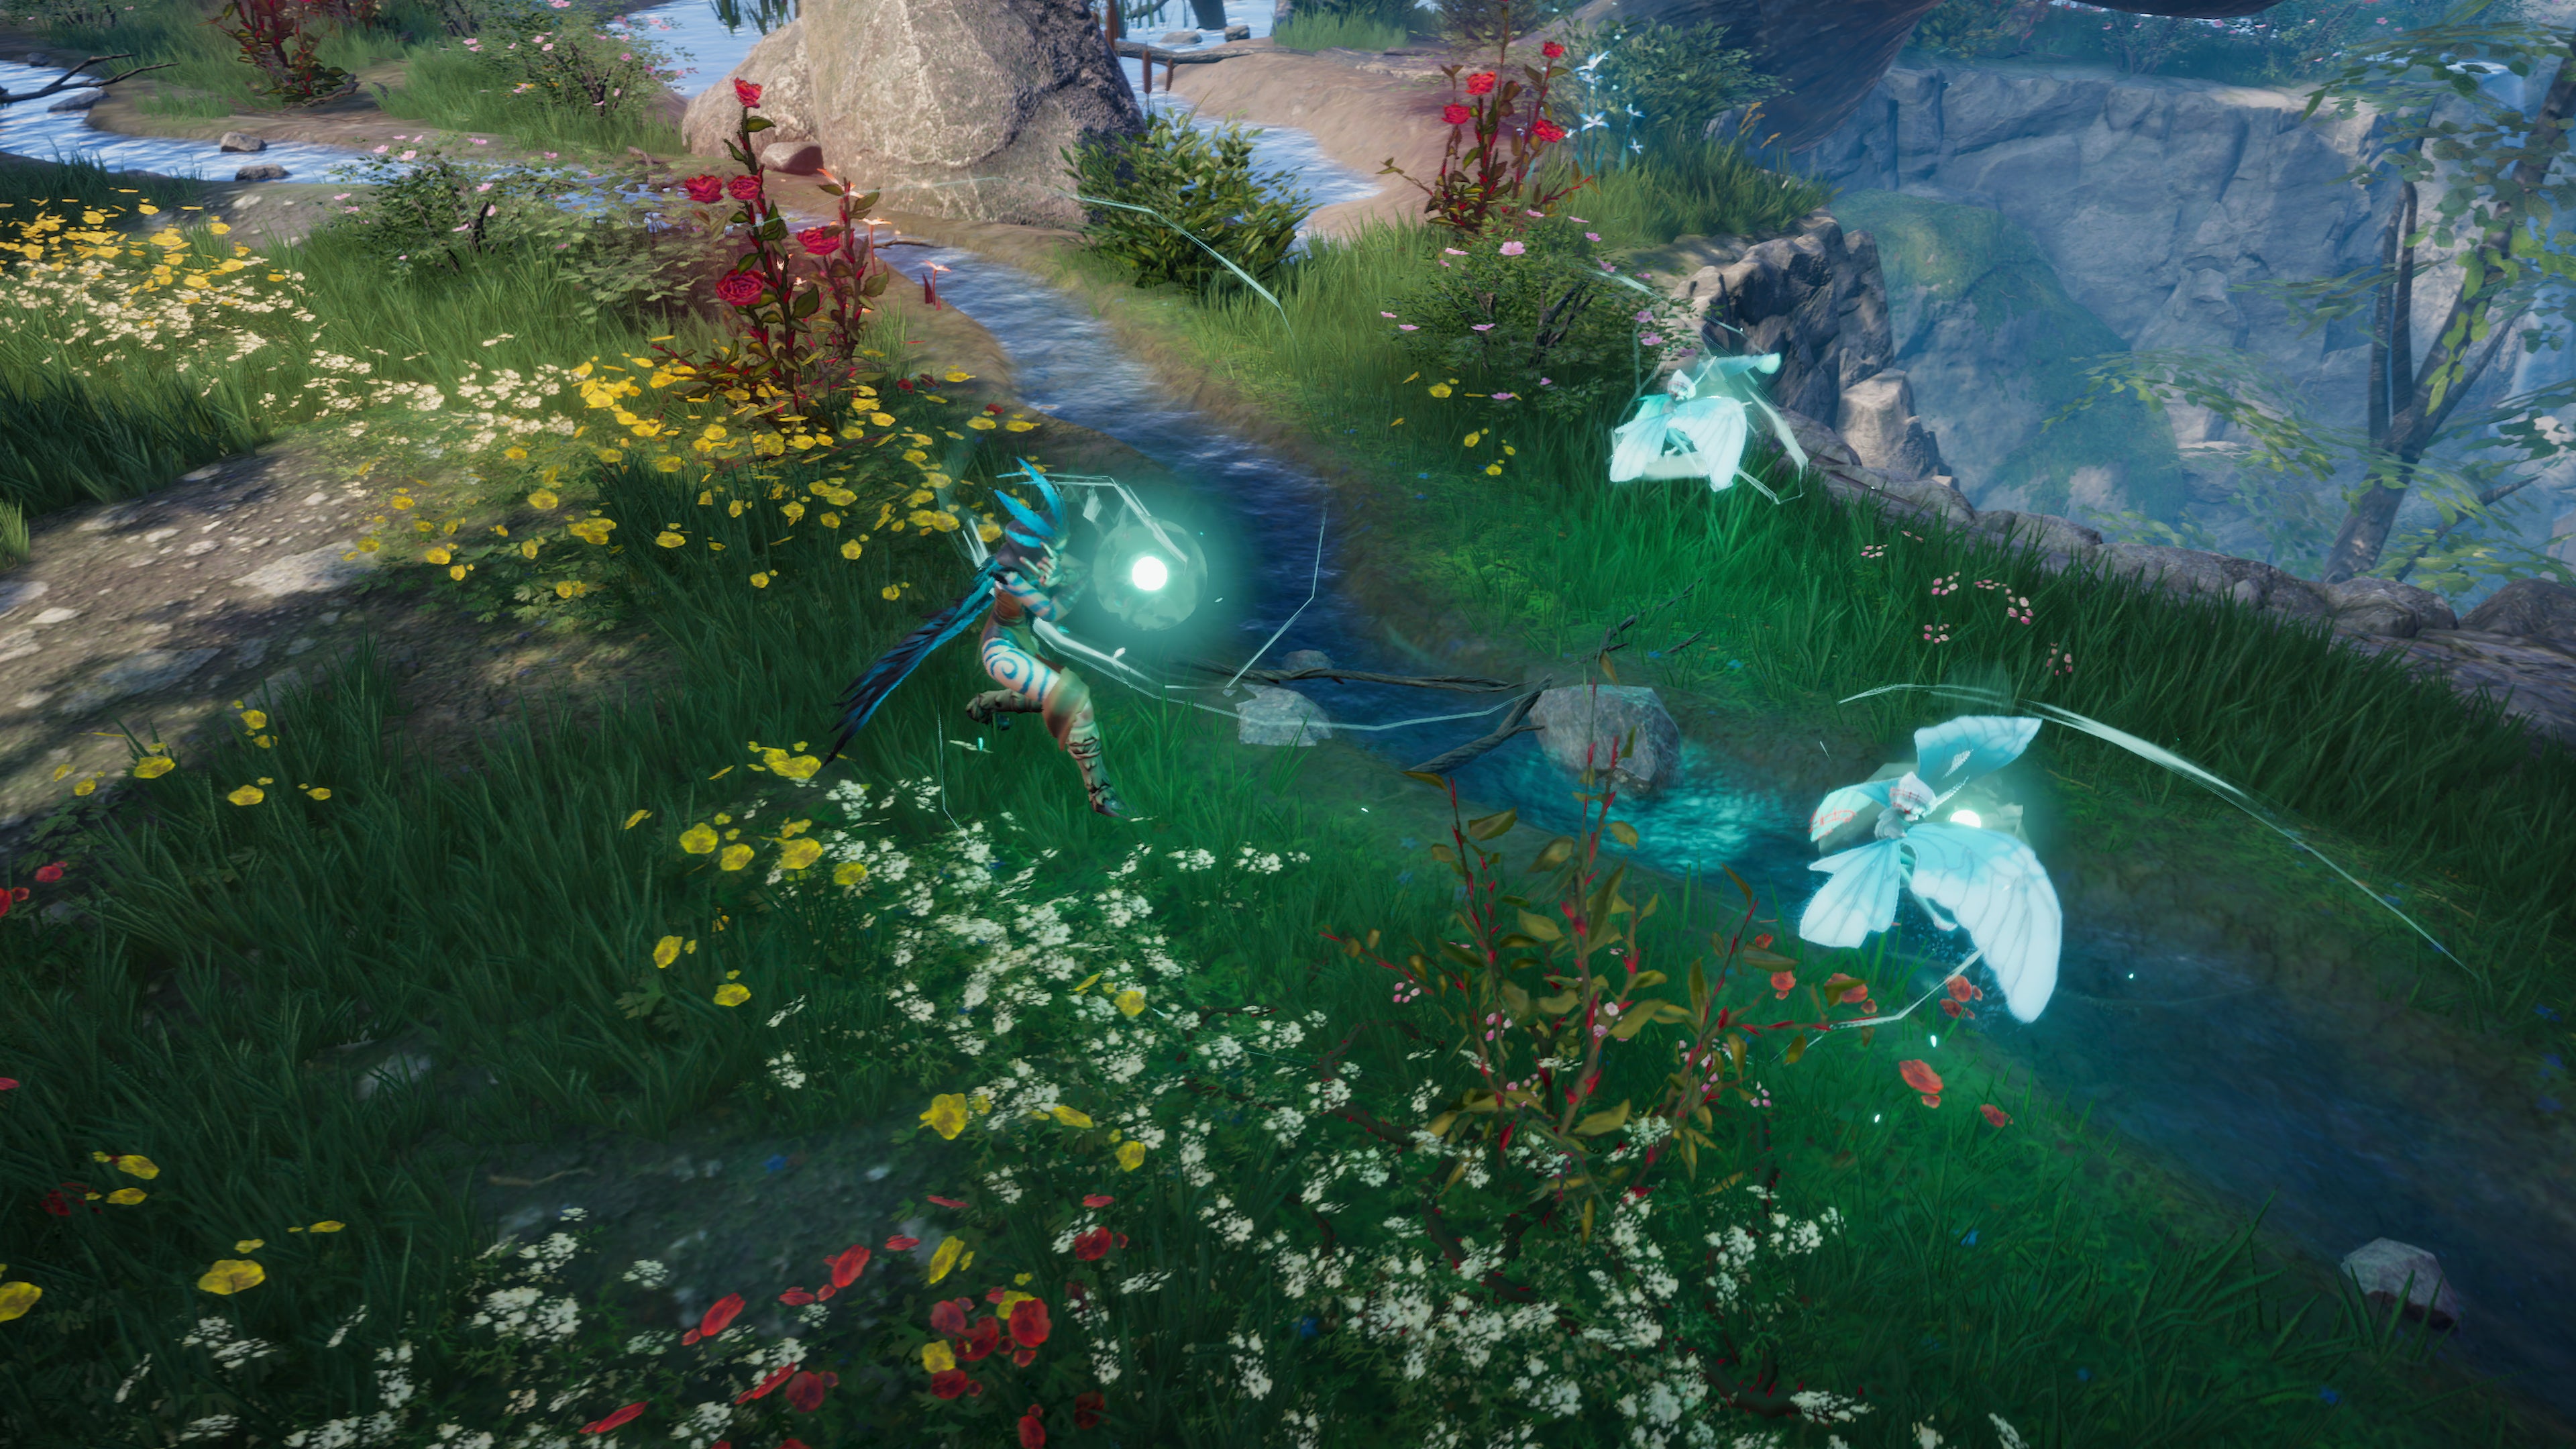 V Rising, a character covered in blue markings is using magic to interact with blue ethereal butterfly-like creatures in a grassy area